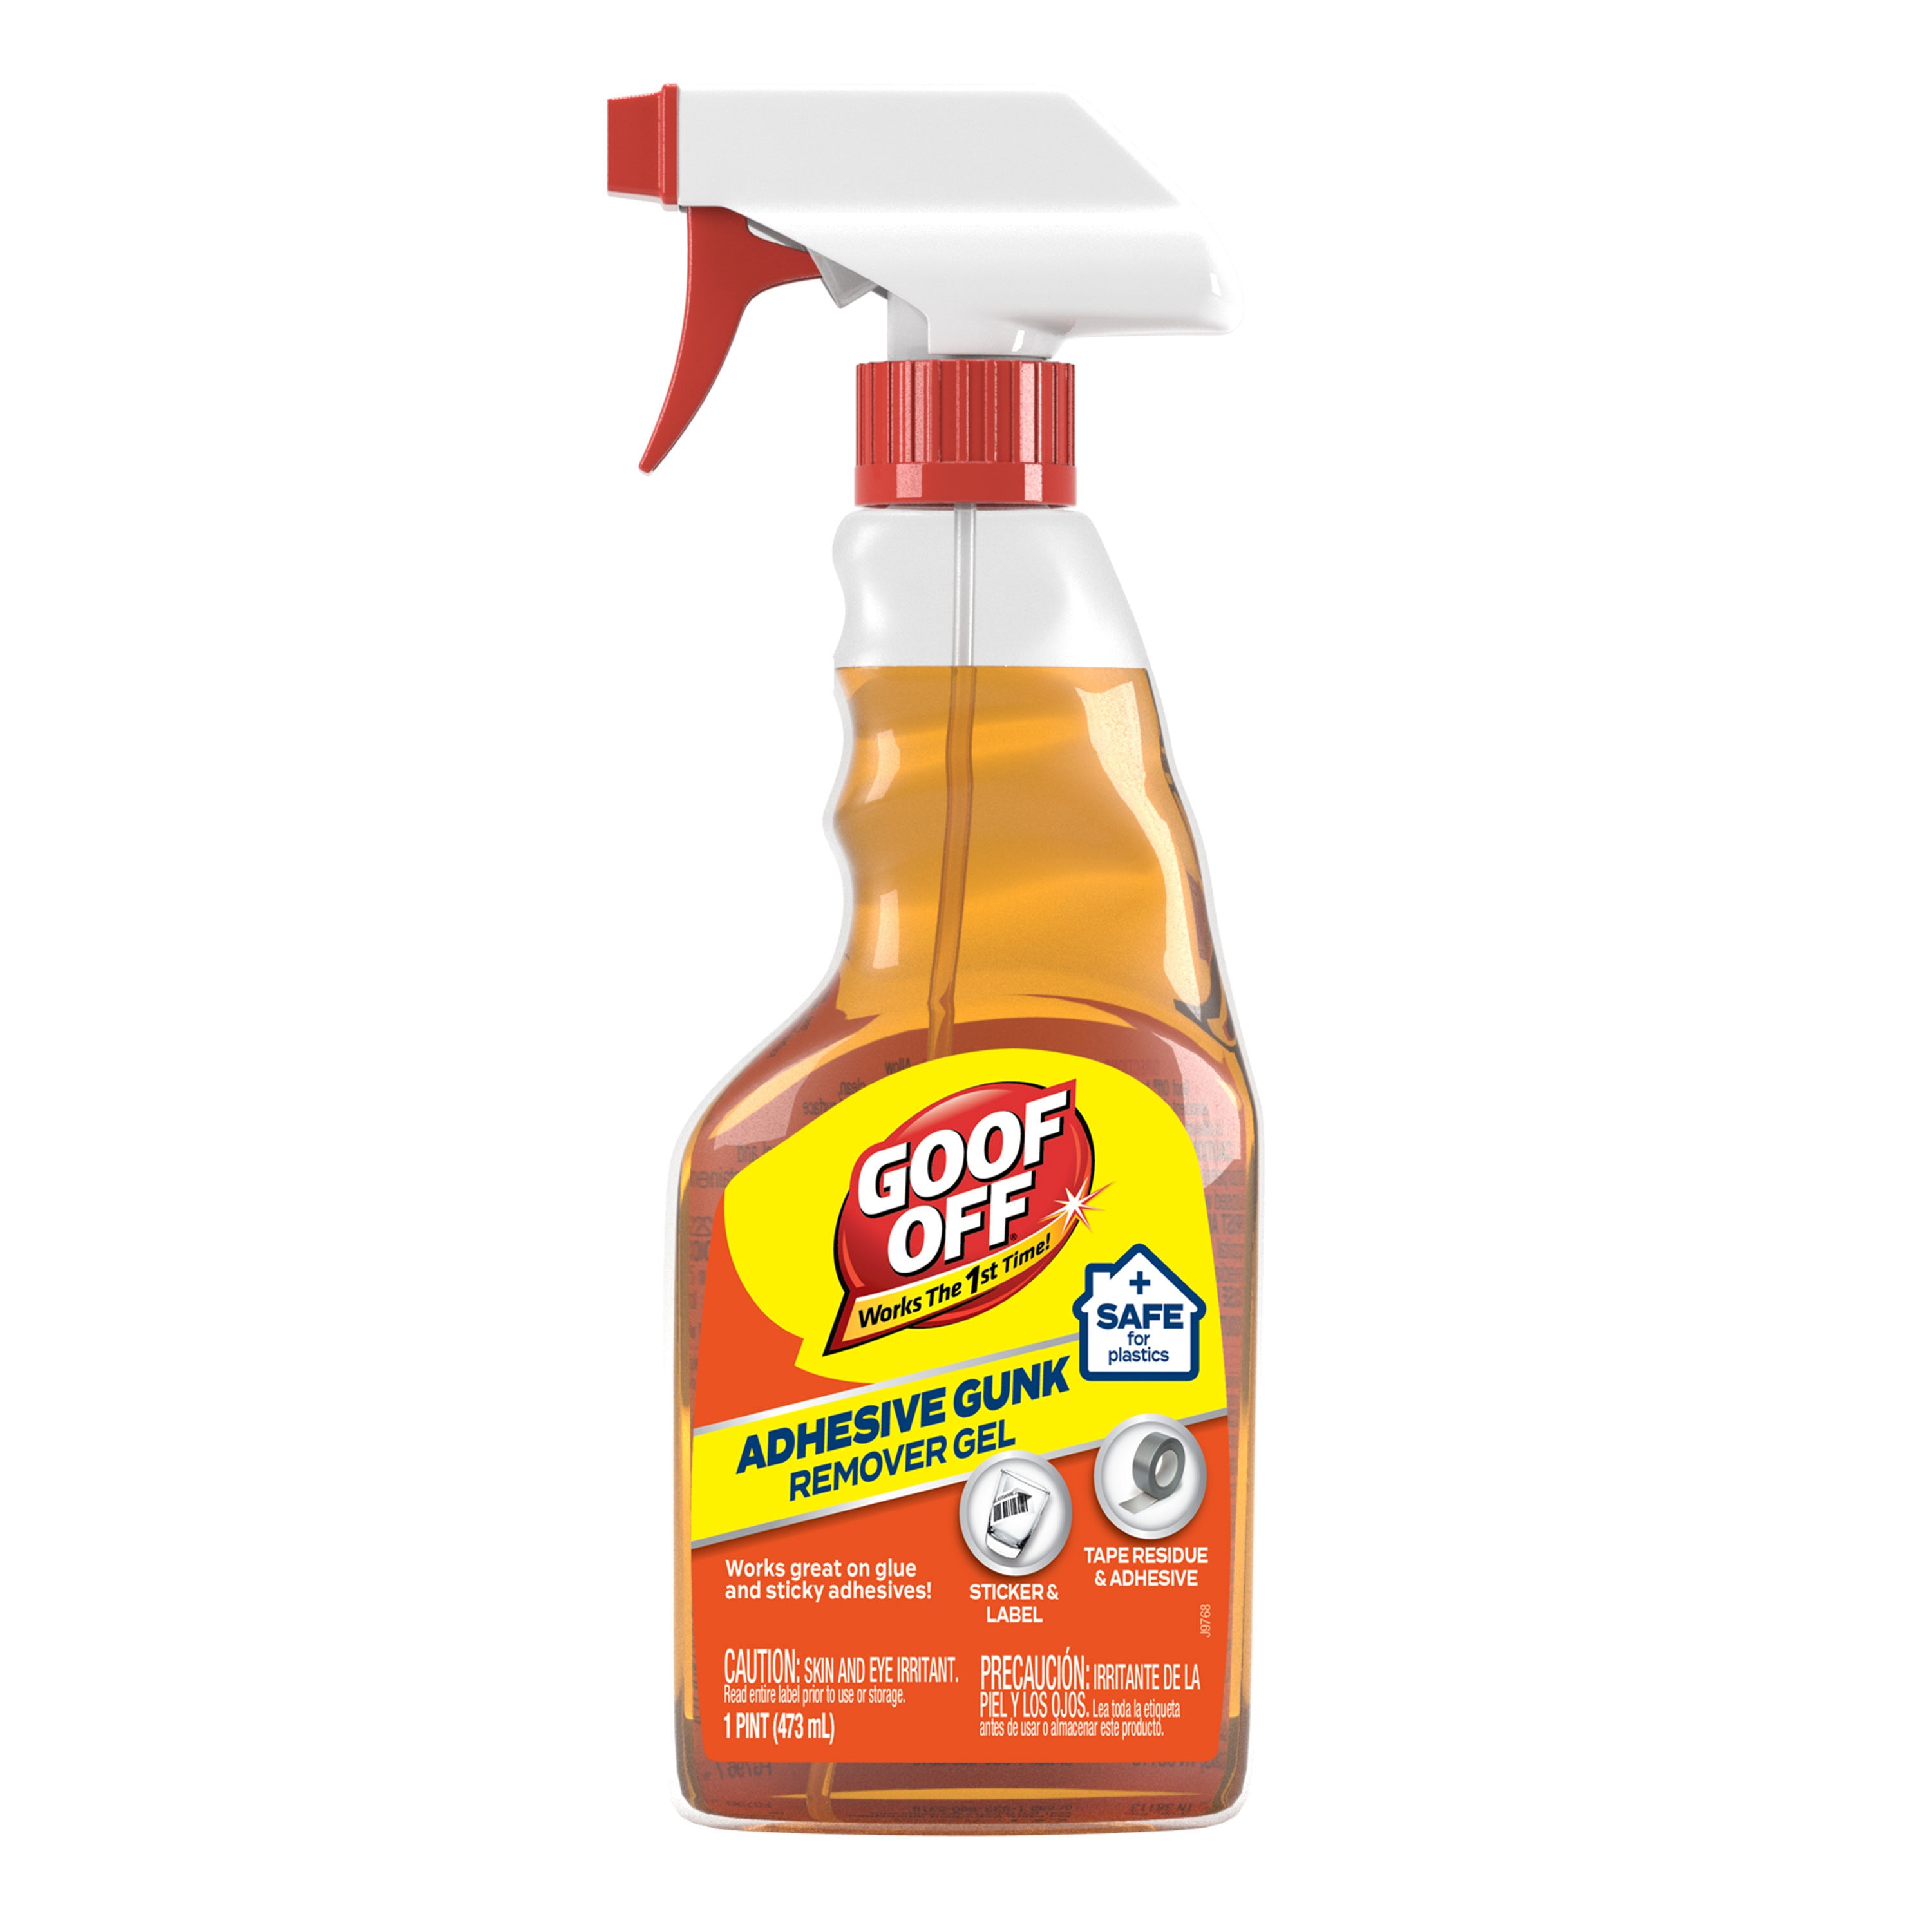 Goo Gone adhesive remover clears messes with ease